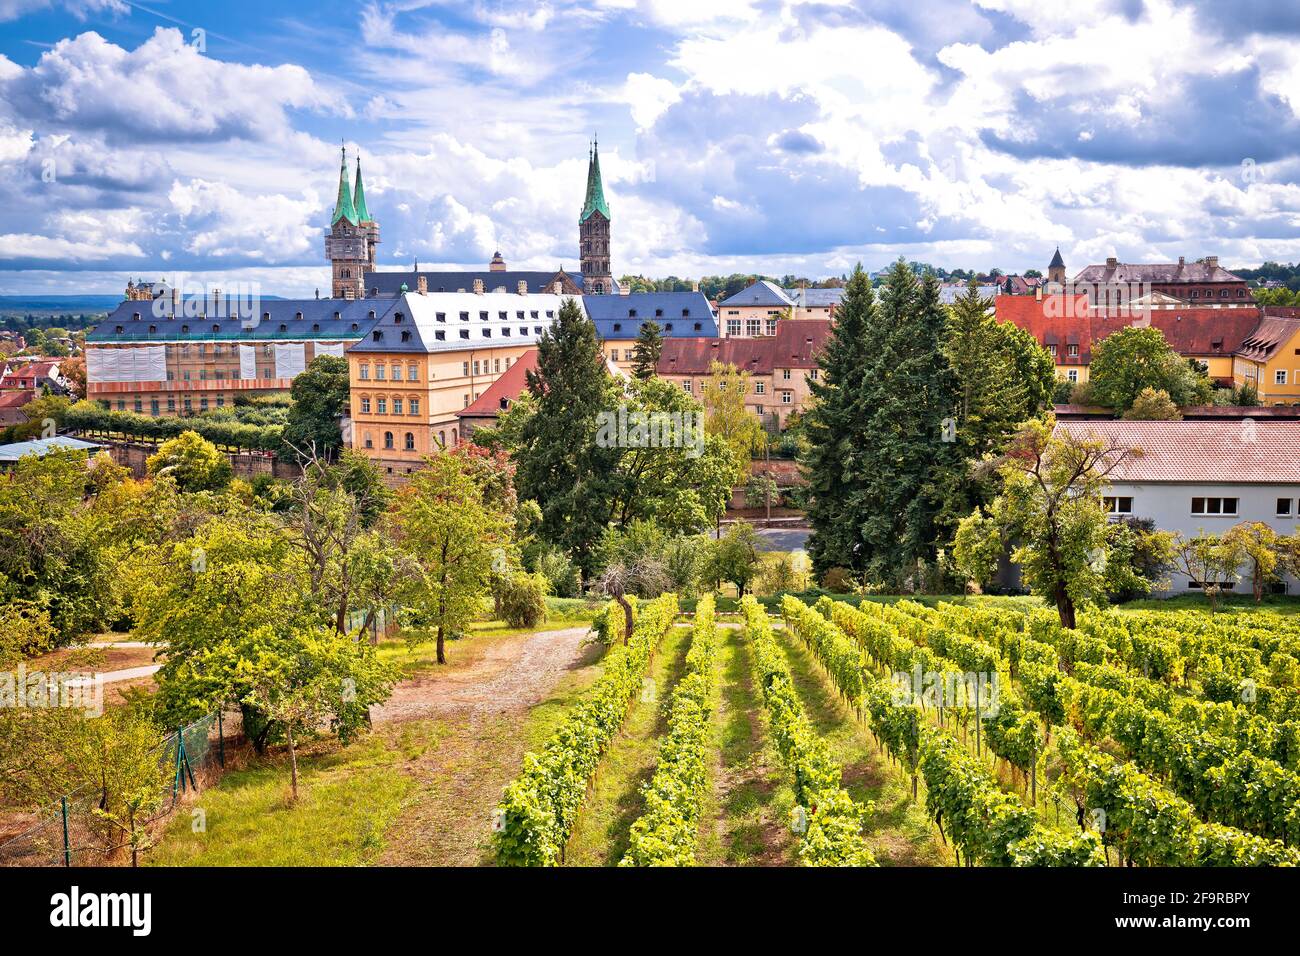 Bamberg. Town of Bamberg view from Michaelsberg vineyards to Bamberger dom square, Upper Franconia, Bavaria region of Germany Stock Photo